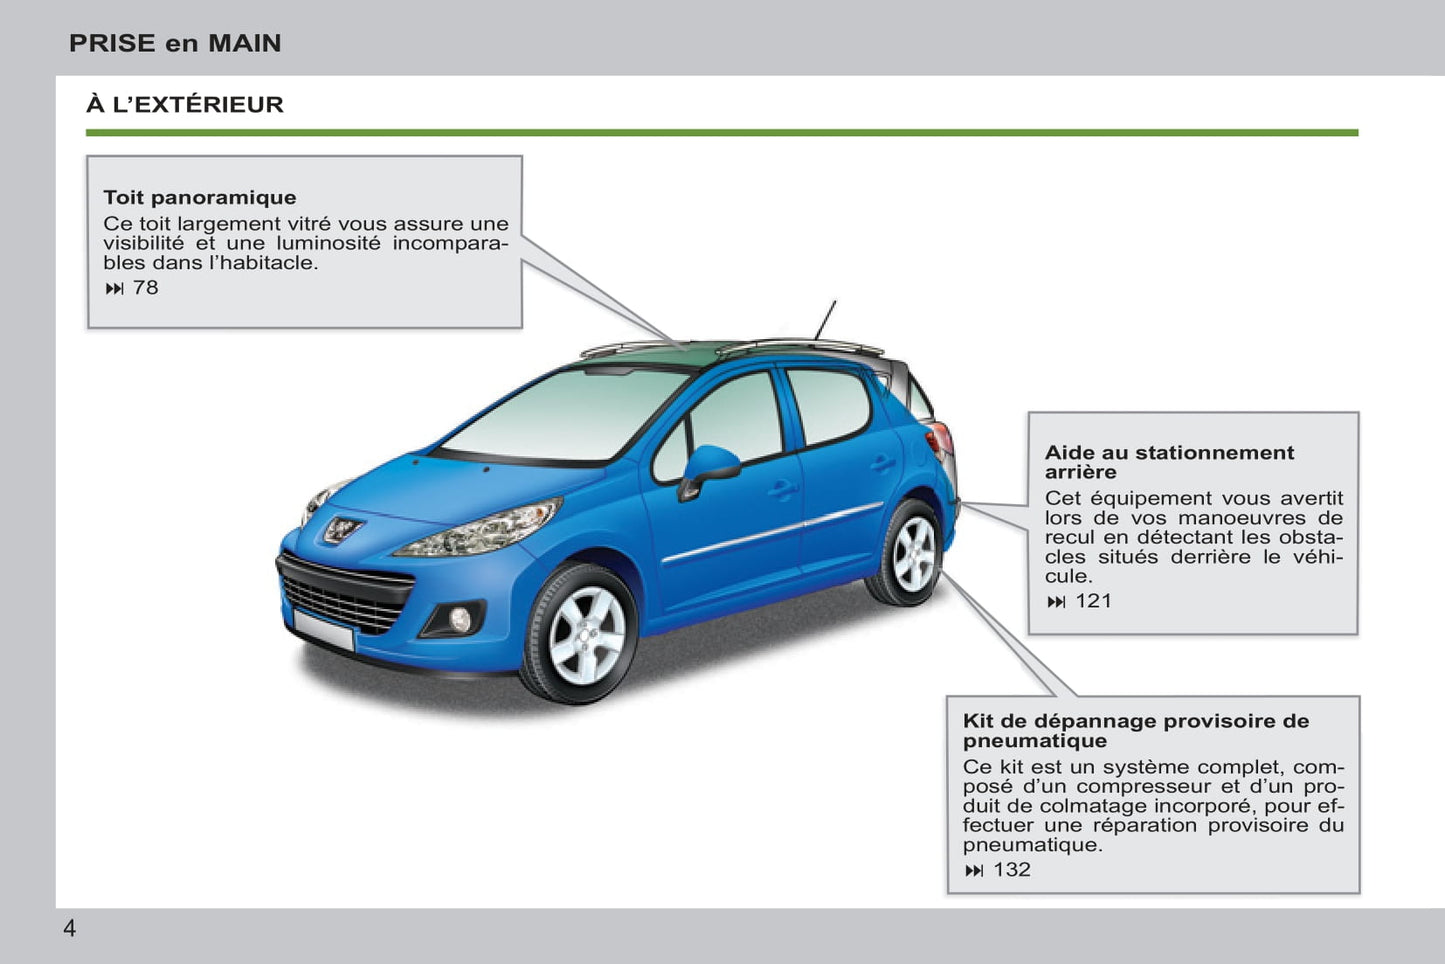 2011-2014 Peugeot 207/207 SW Owner's Manual | French